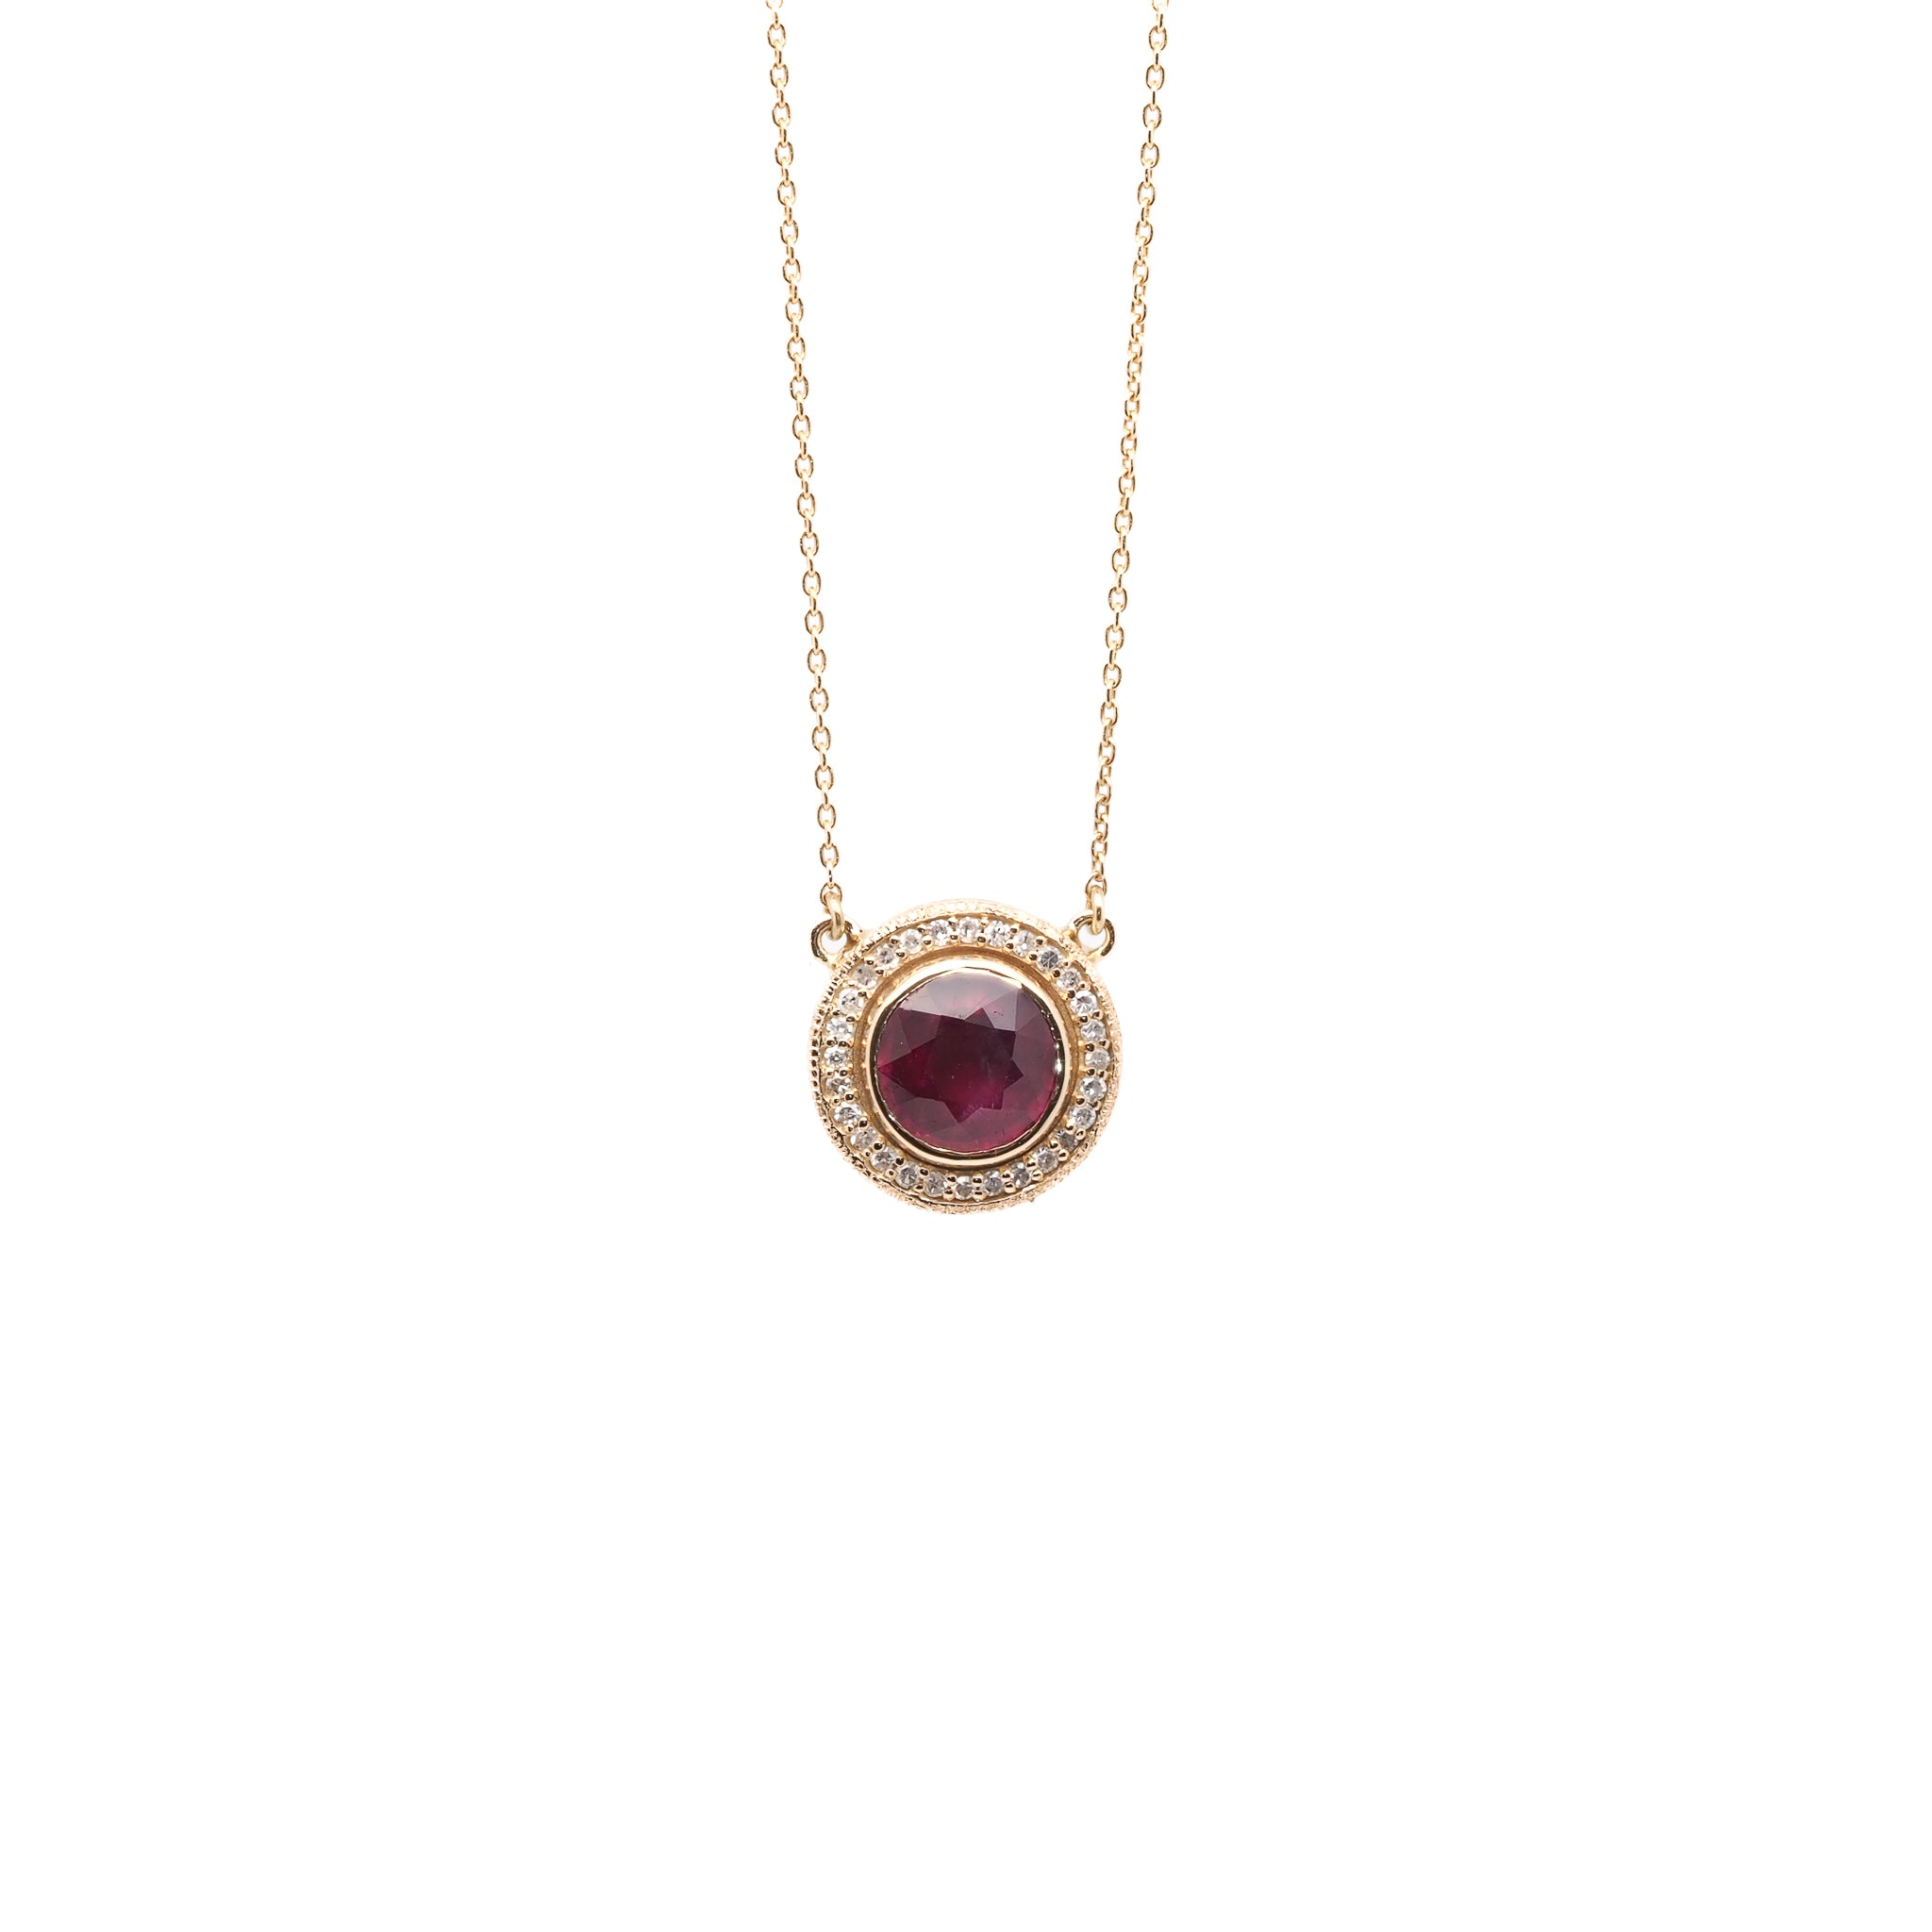 the Elegant Ruby &amp; Diamond Necklace showcasing the stunning 14k yellow gold pendant adorned with a vibrant 1.750ct natural ruby and sparkling 0.40ct diamonds.